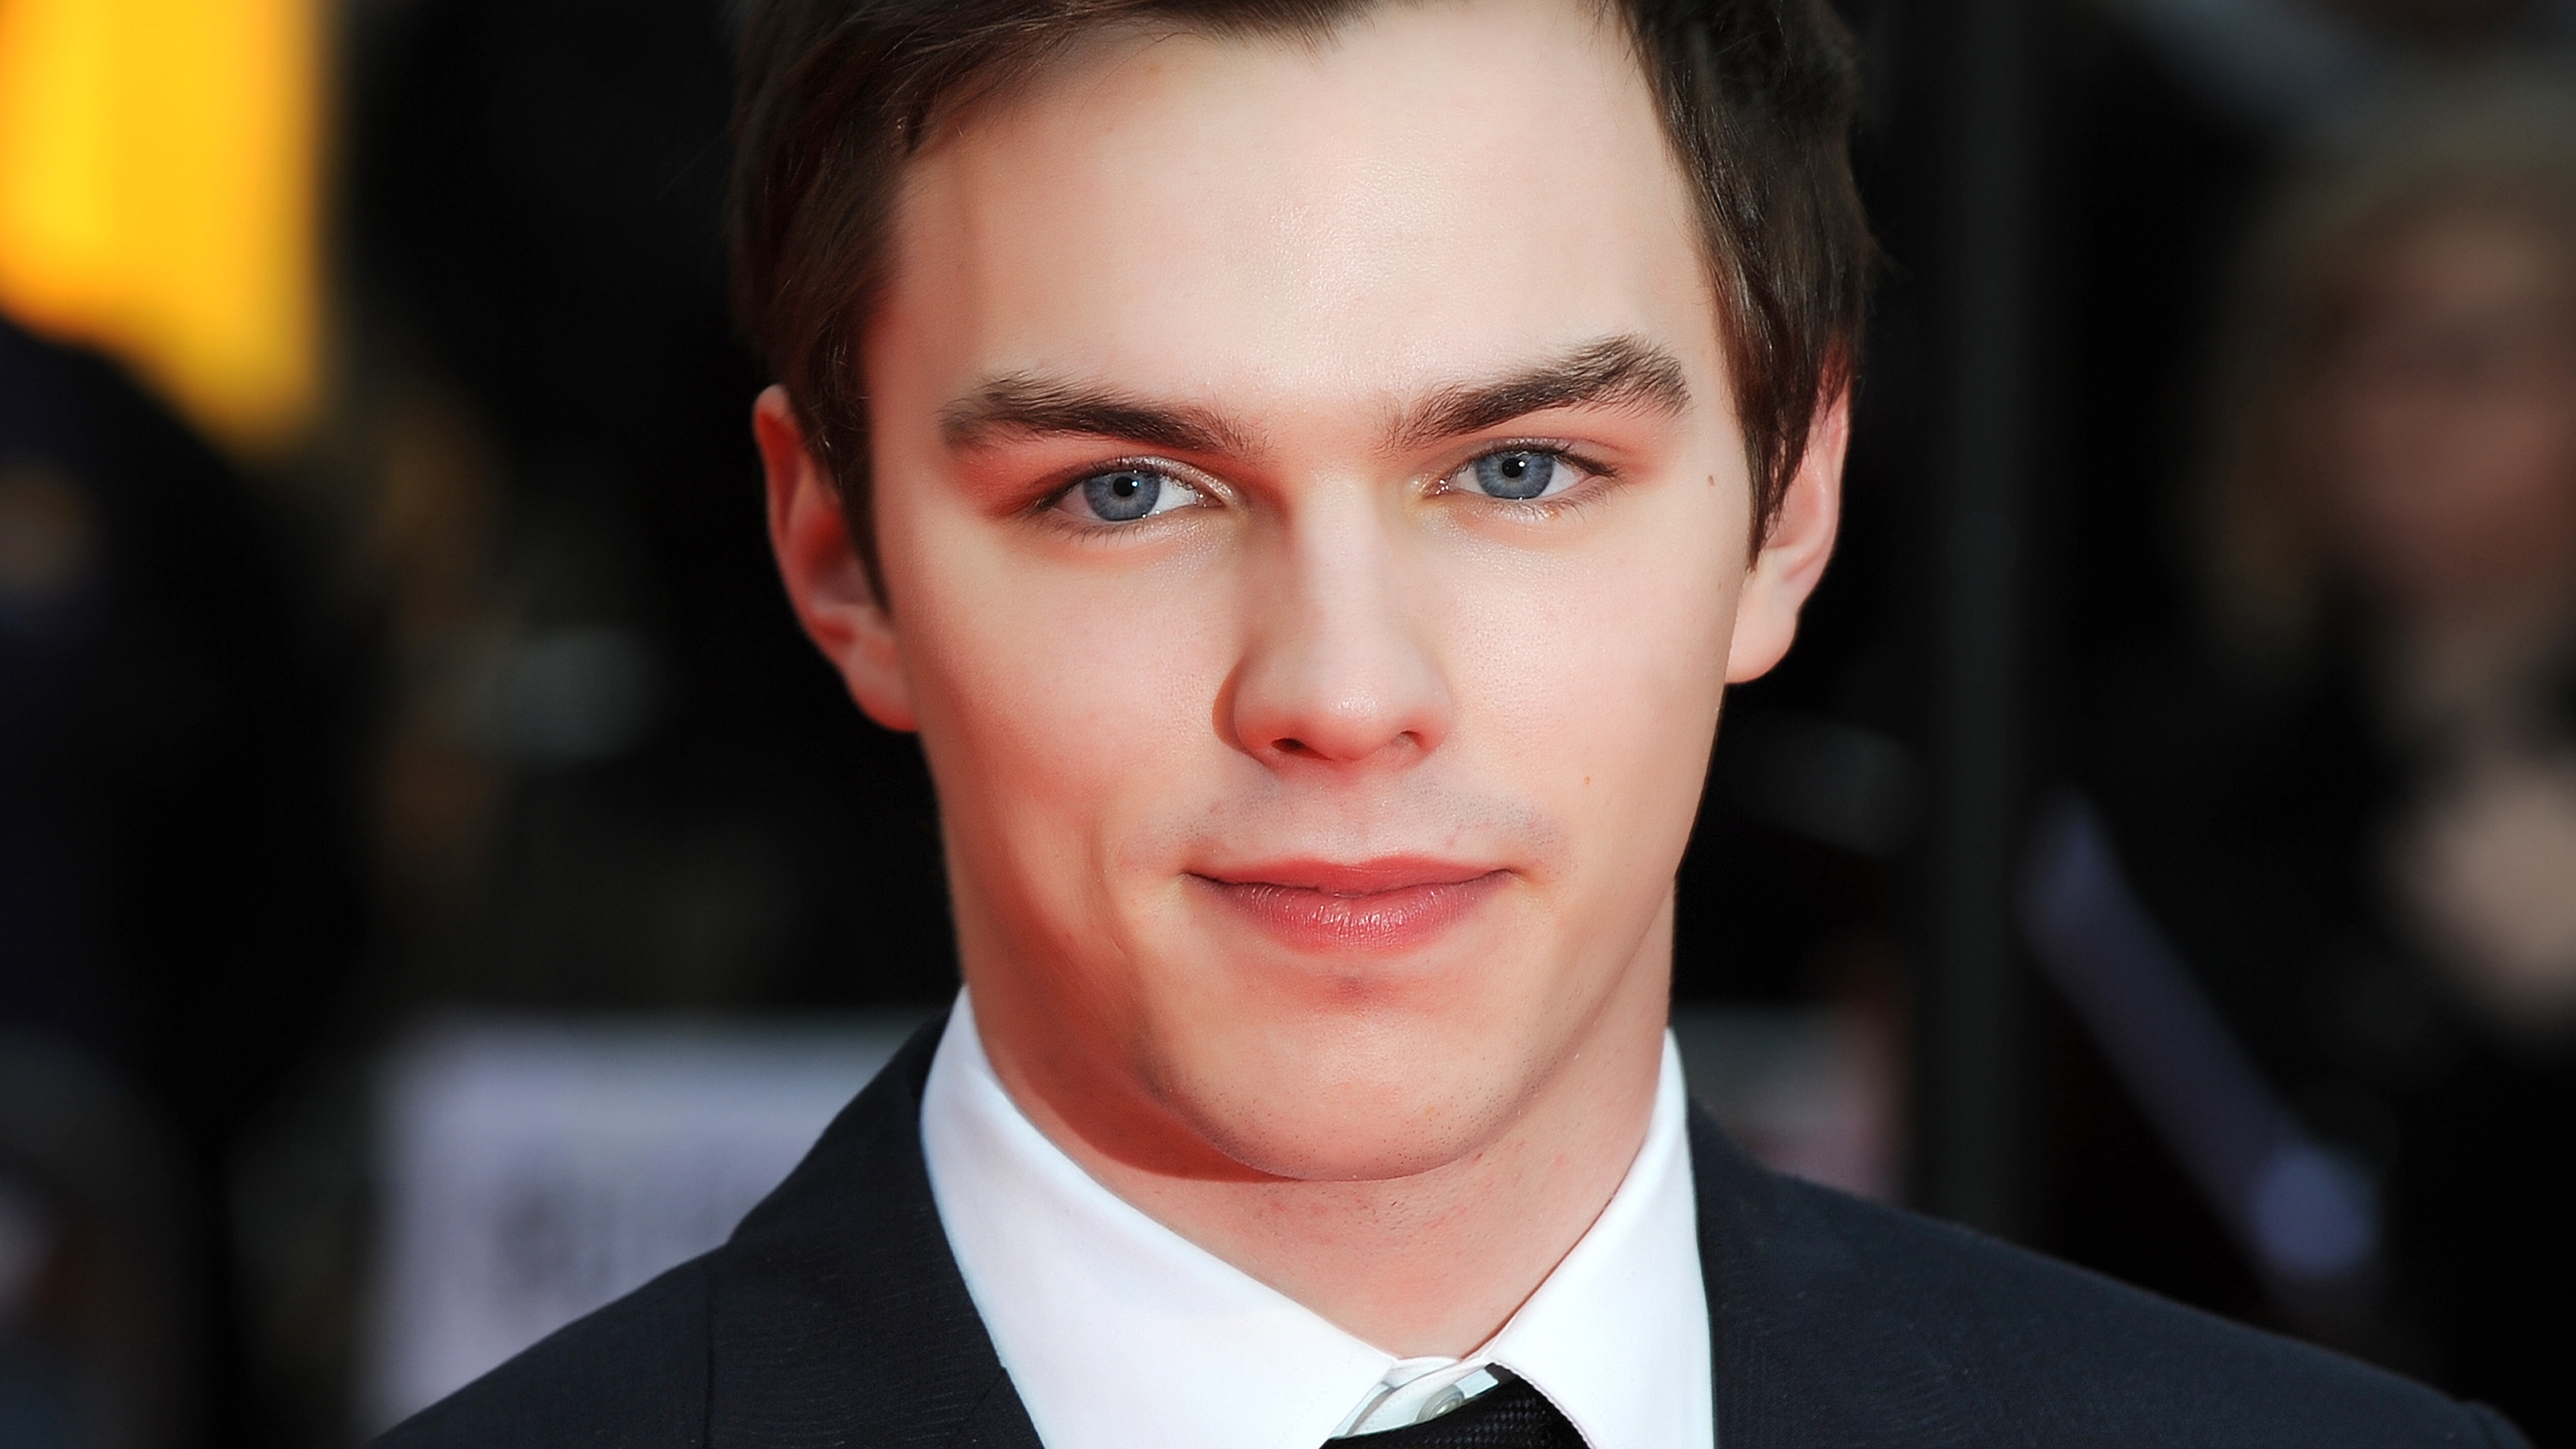 Nicholas Hoult Actor for 3840 x 2160 Ultra HD resolution